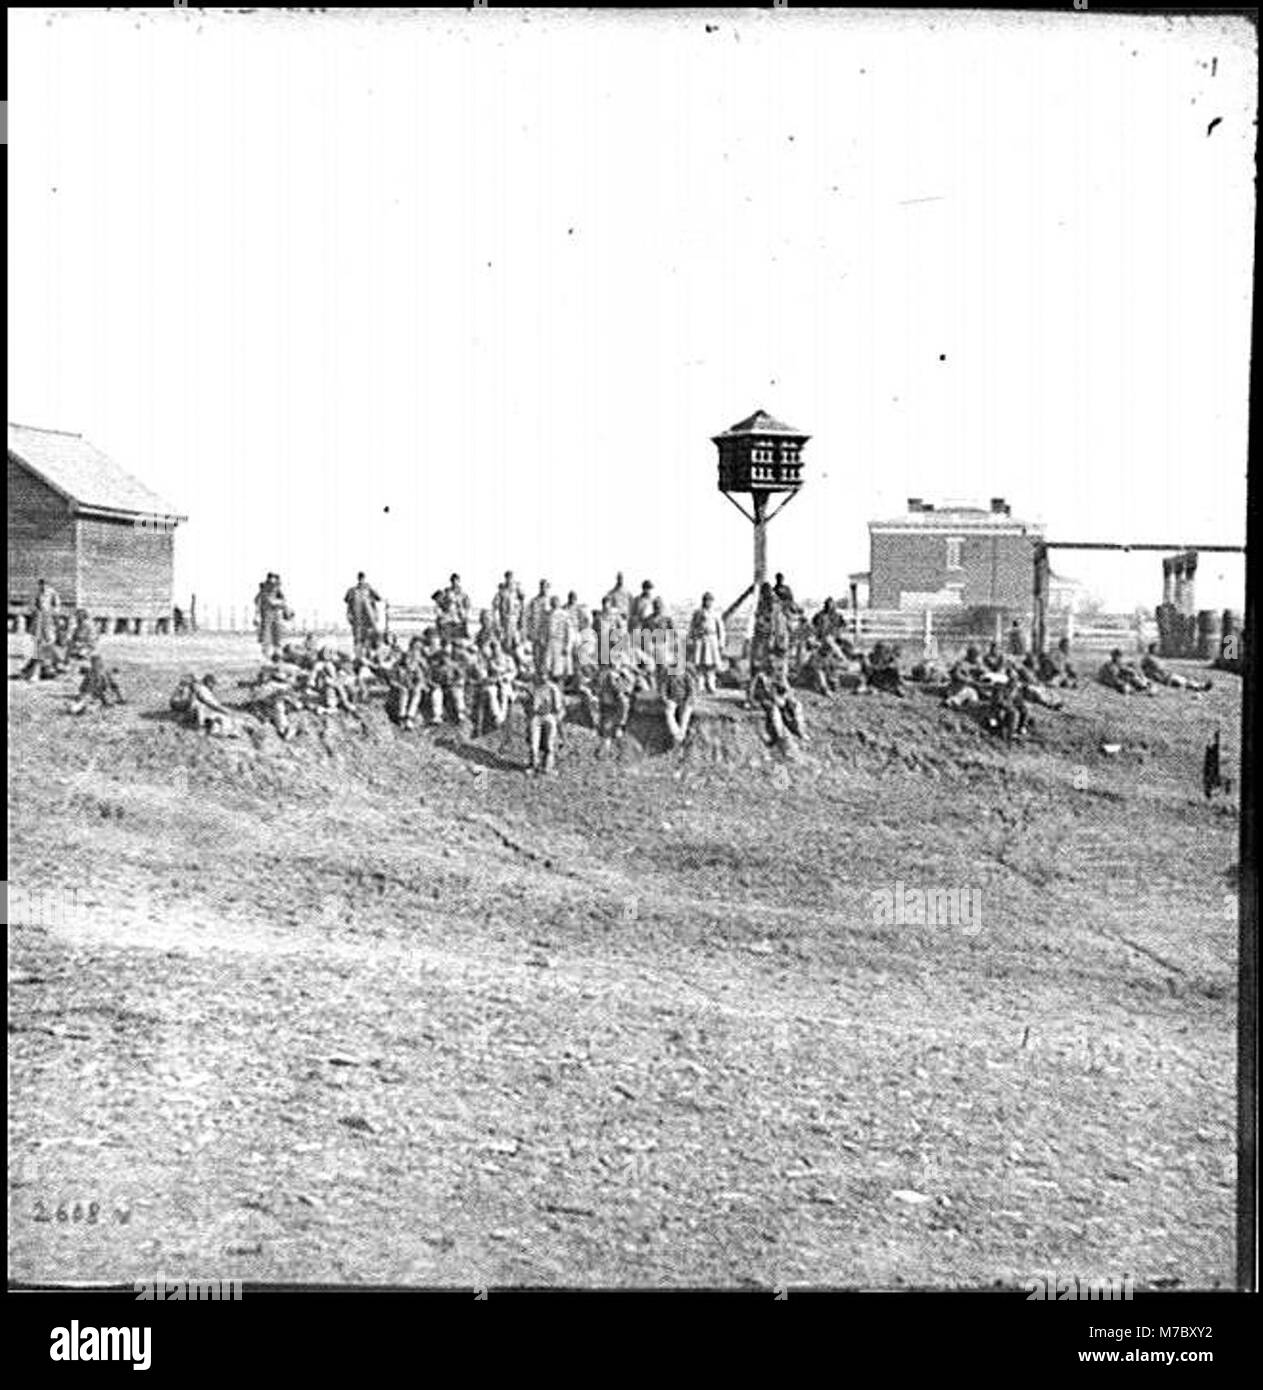 Aiken's Landing, Va. African-American soldiers resting near the Aiken house, view looking toward the house LOC cwpb.02031 Stock Photo